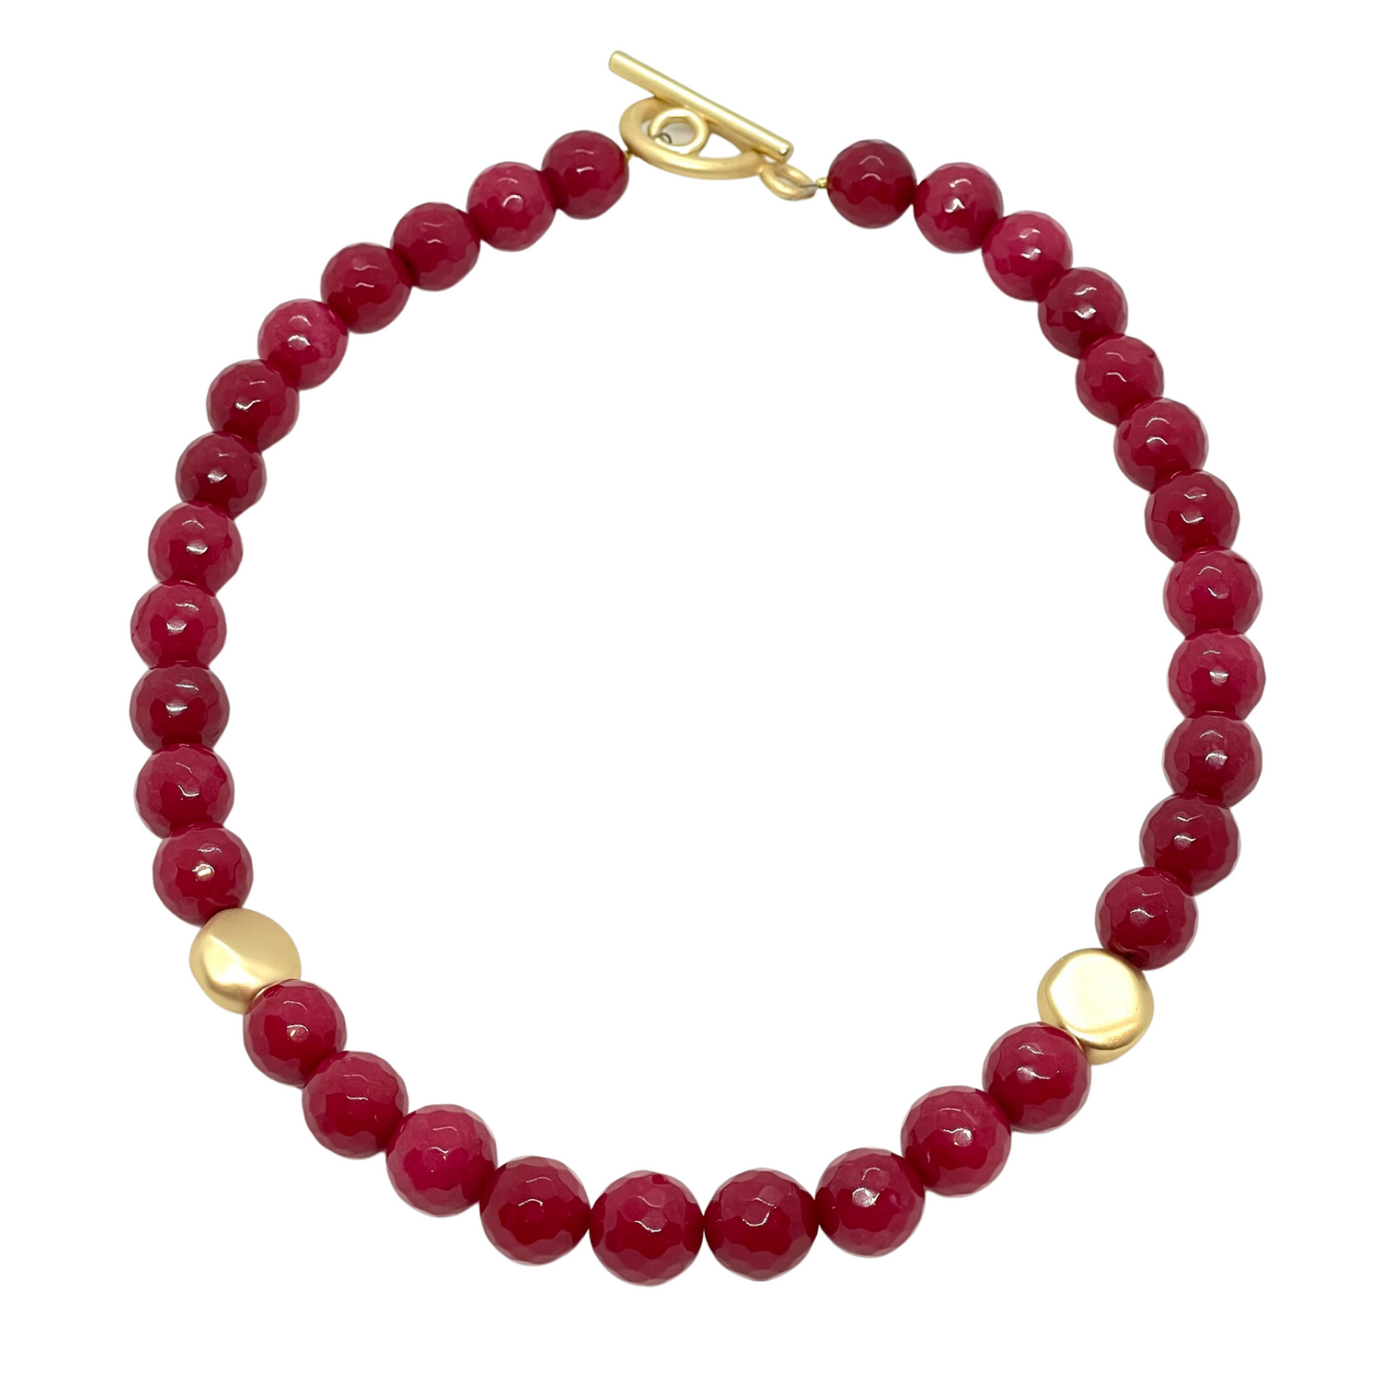 Red Jade Necklace With Matte Gold Flat Bead Accents